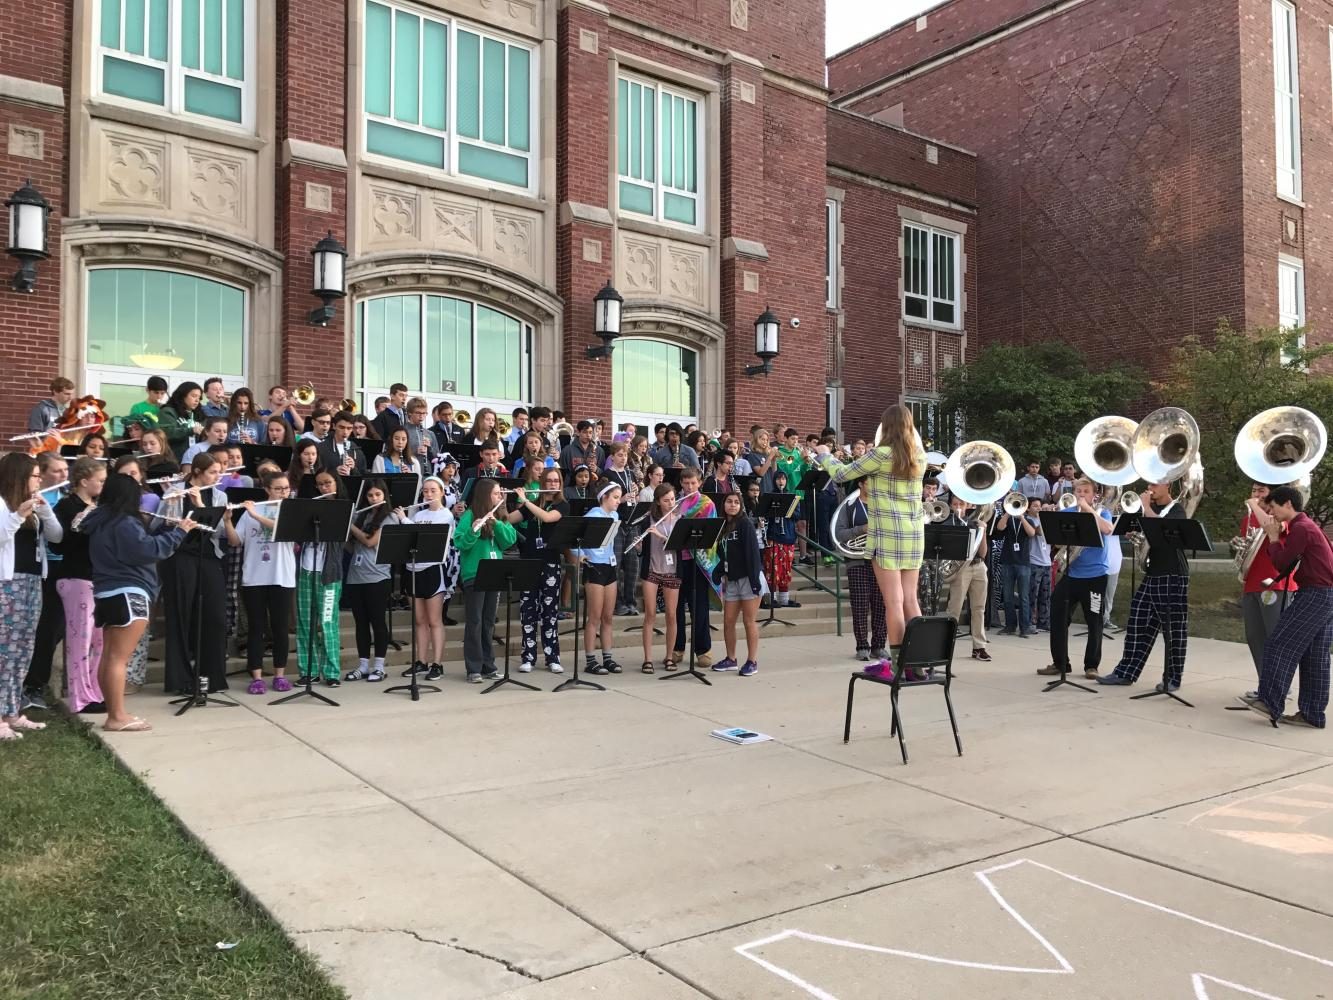 York marching band starts off the 2017 Homecoming Week, playing pep tunes, as students walk into school. 